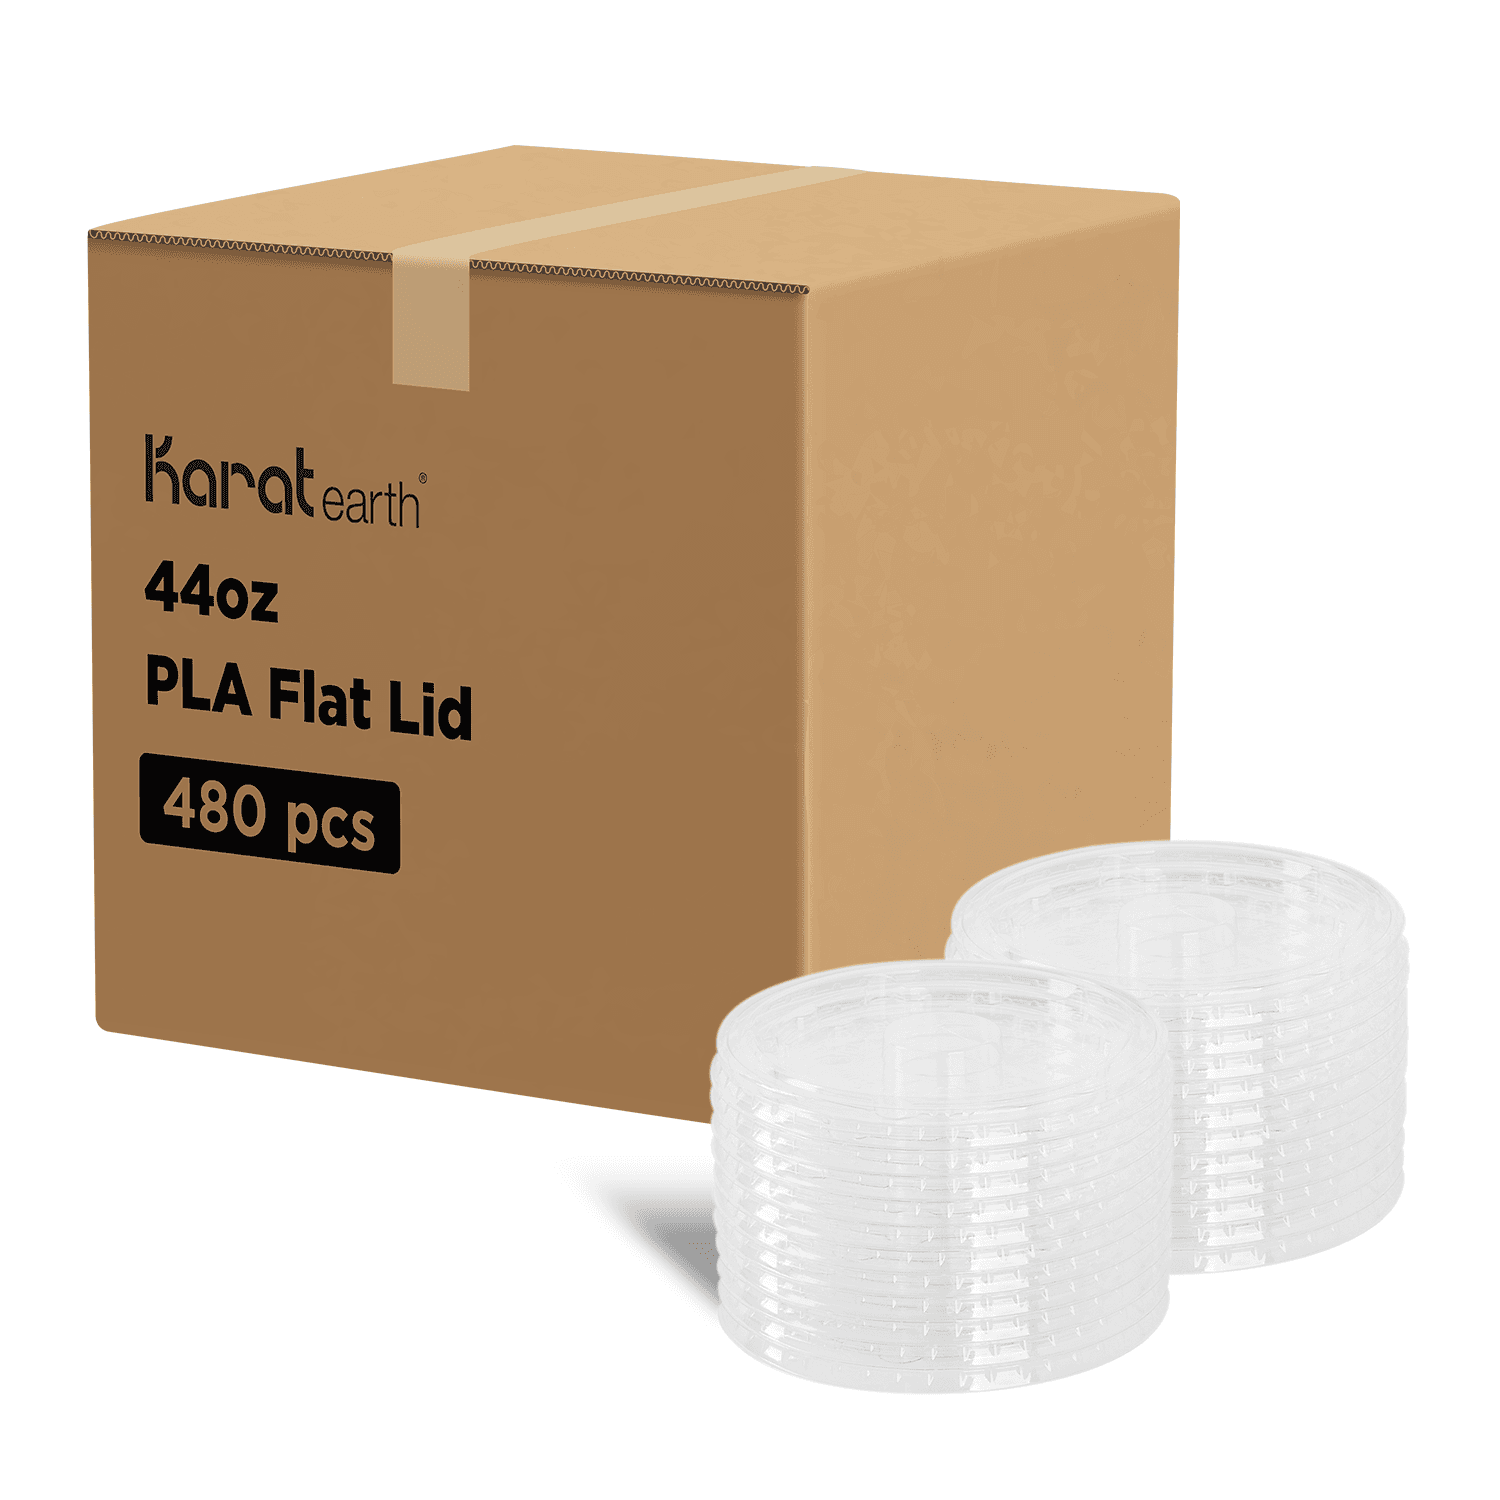 Karat Earth PLA Flat Lids for 44oz Paper Cold Cups stacked beside brown box